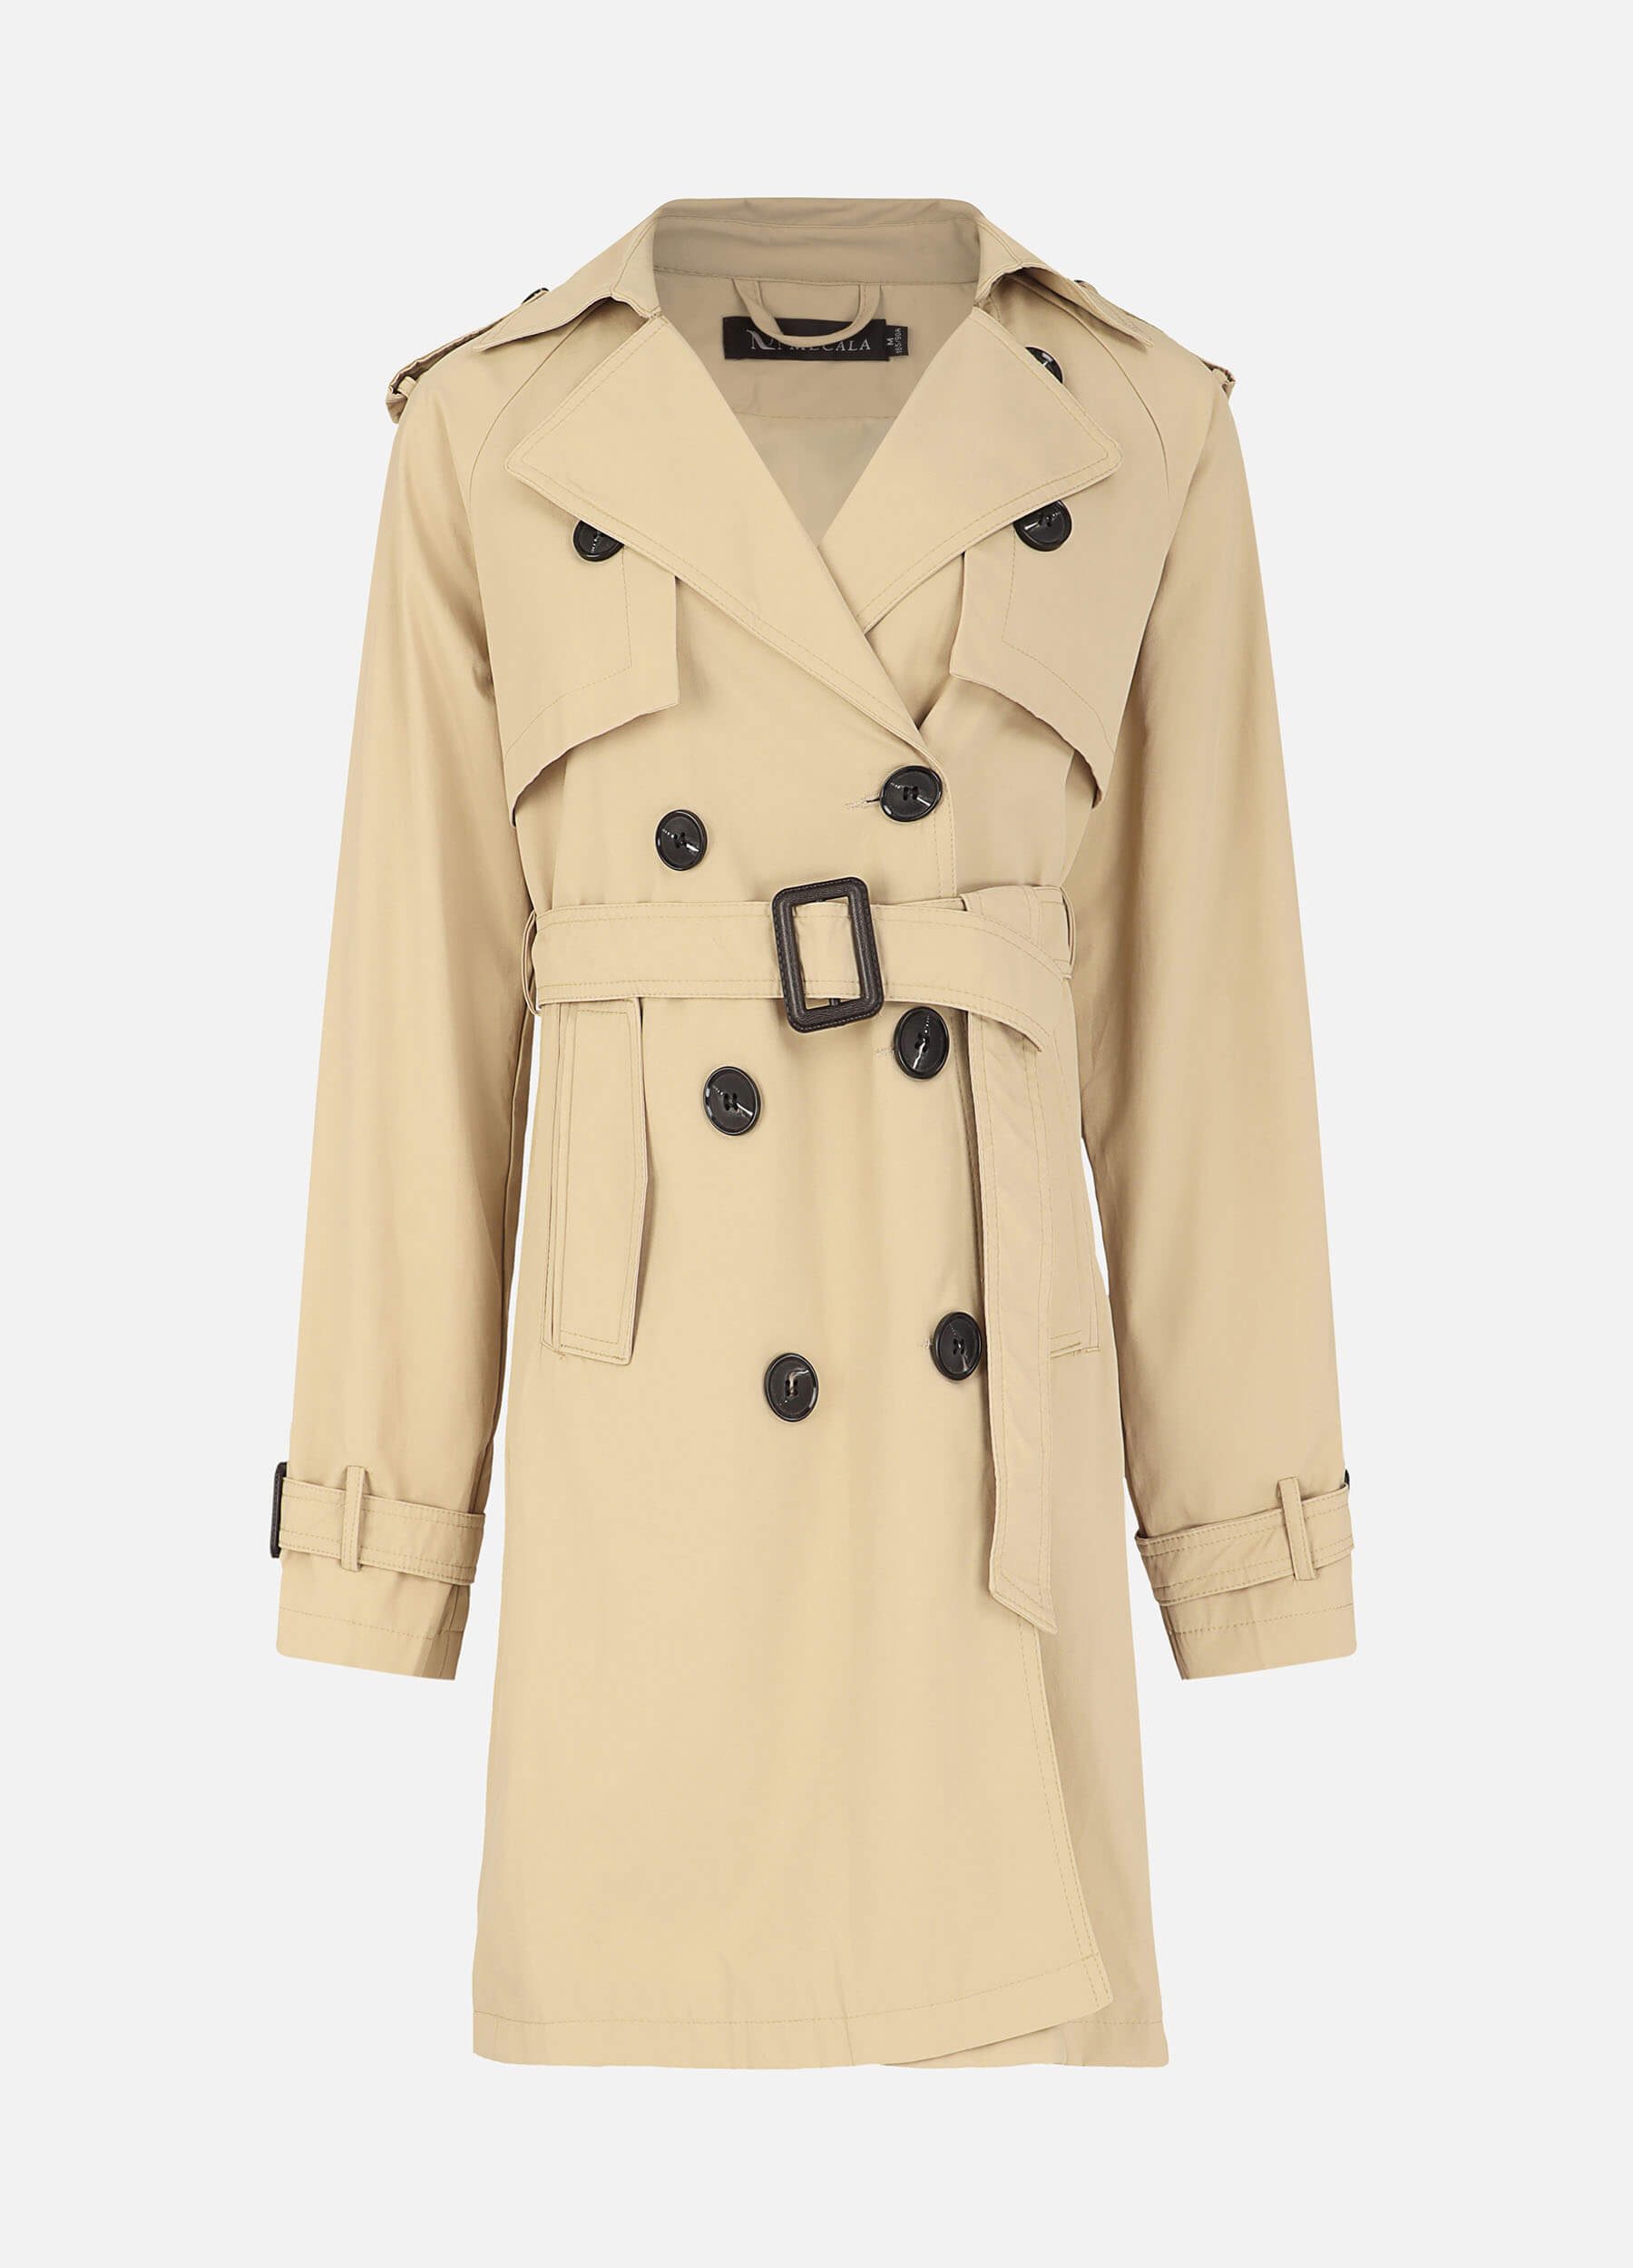 MECALA Women's Solid Double Breasted Belted Khaki Trench Coat